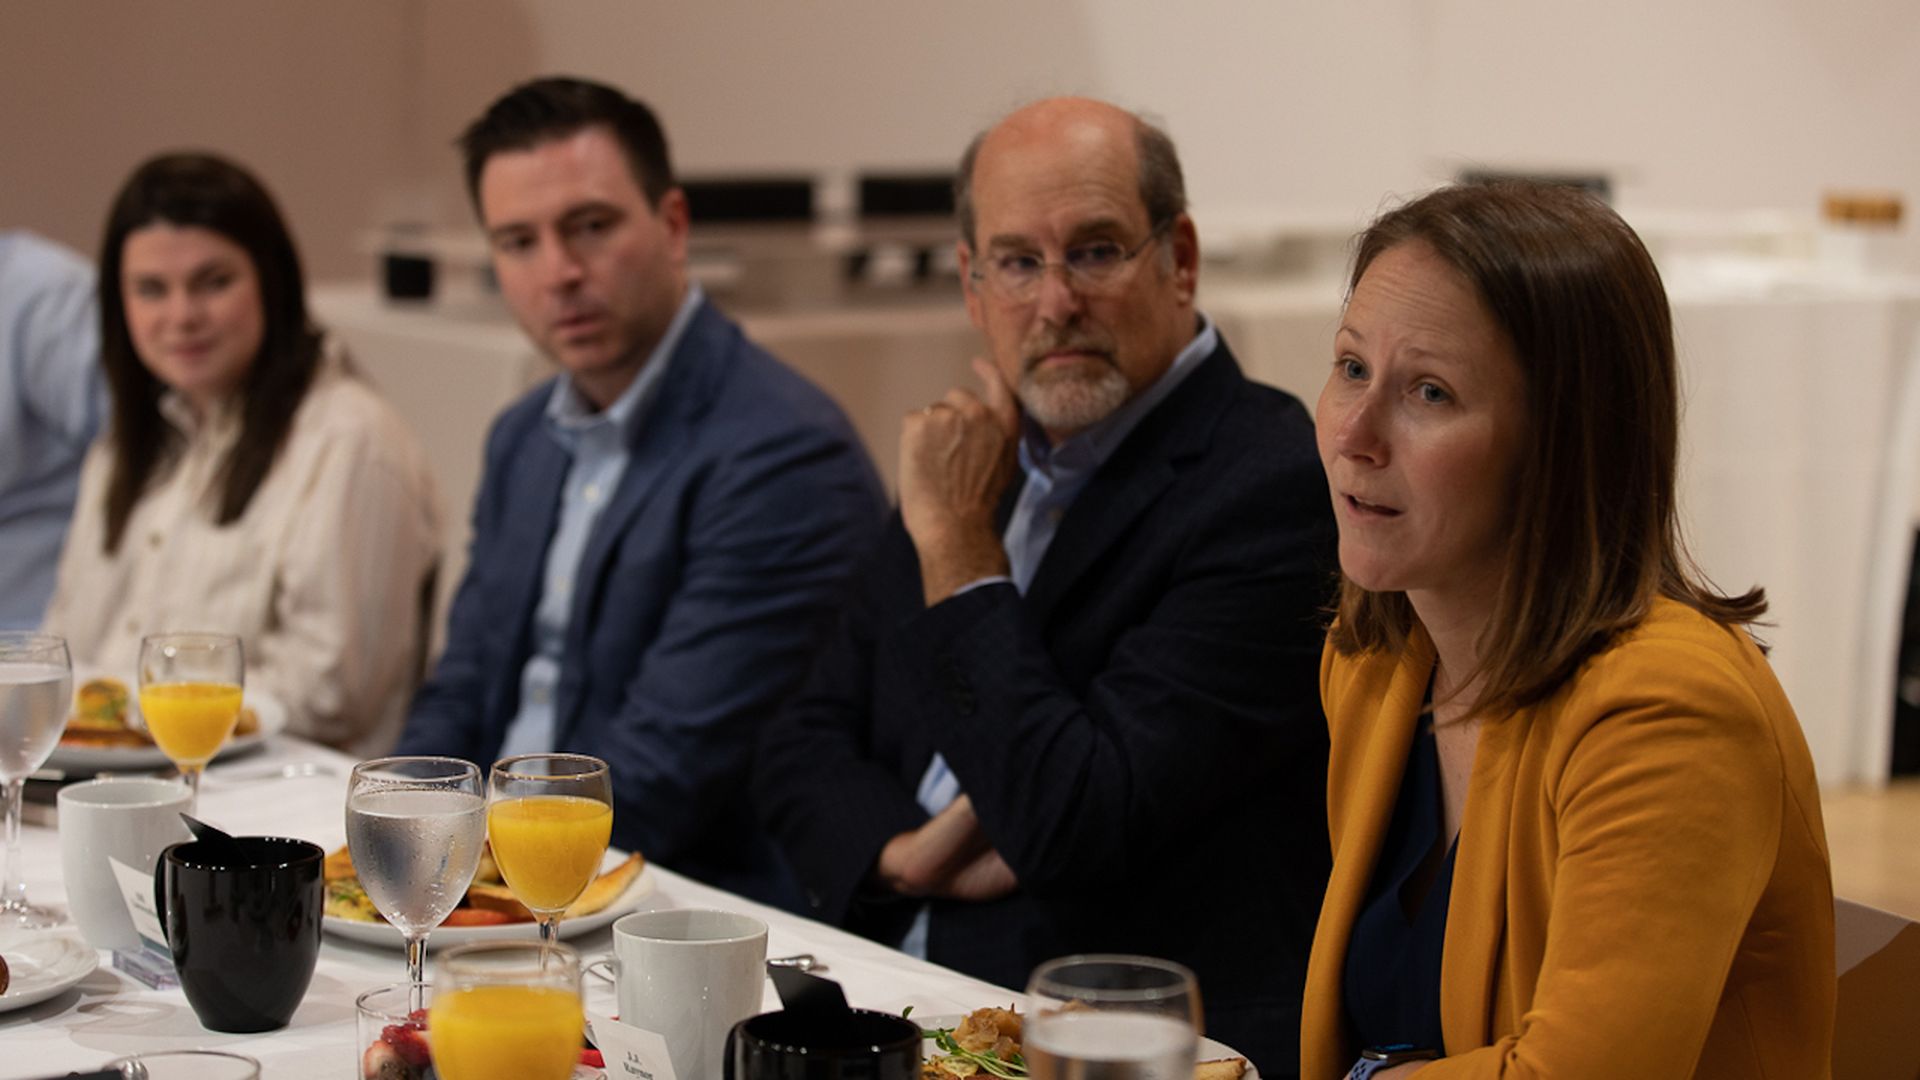 JJ Raynor, director of business development at Uber, speaks at the Climate Deals breakfast roundtable.